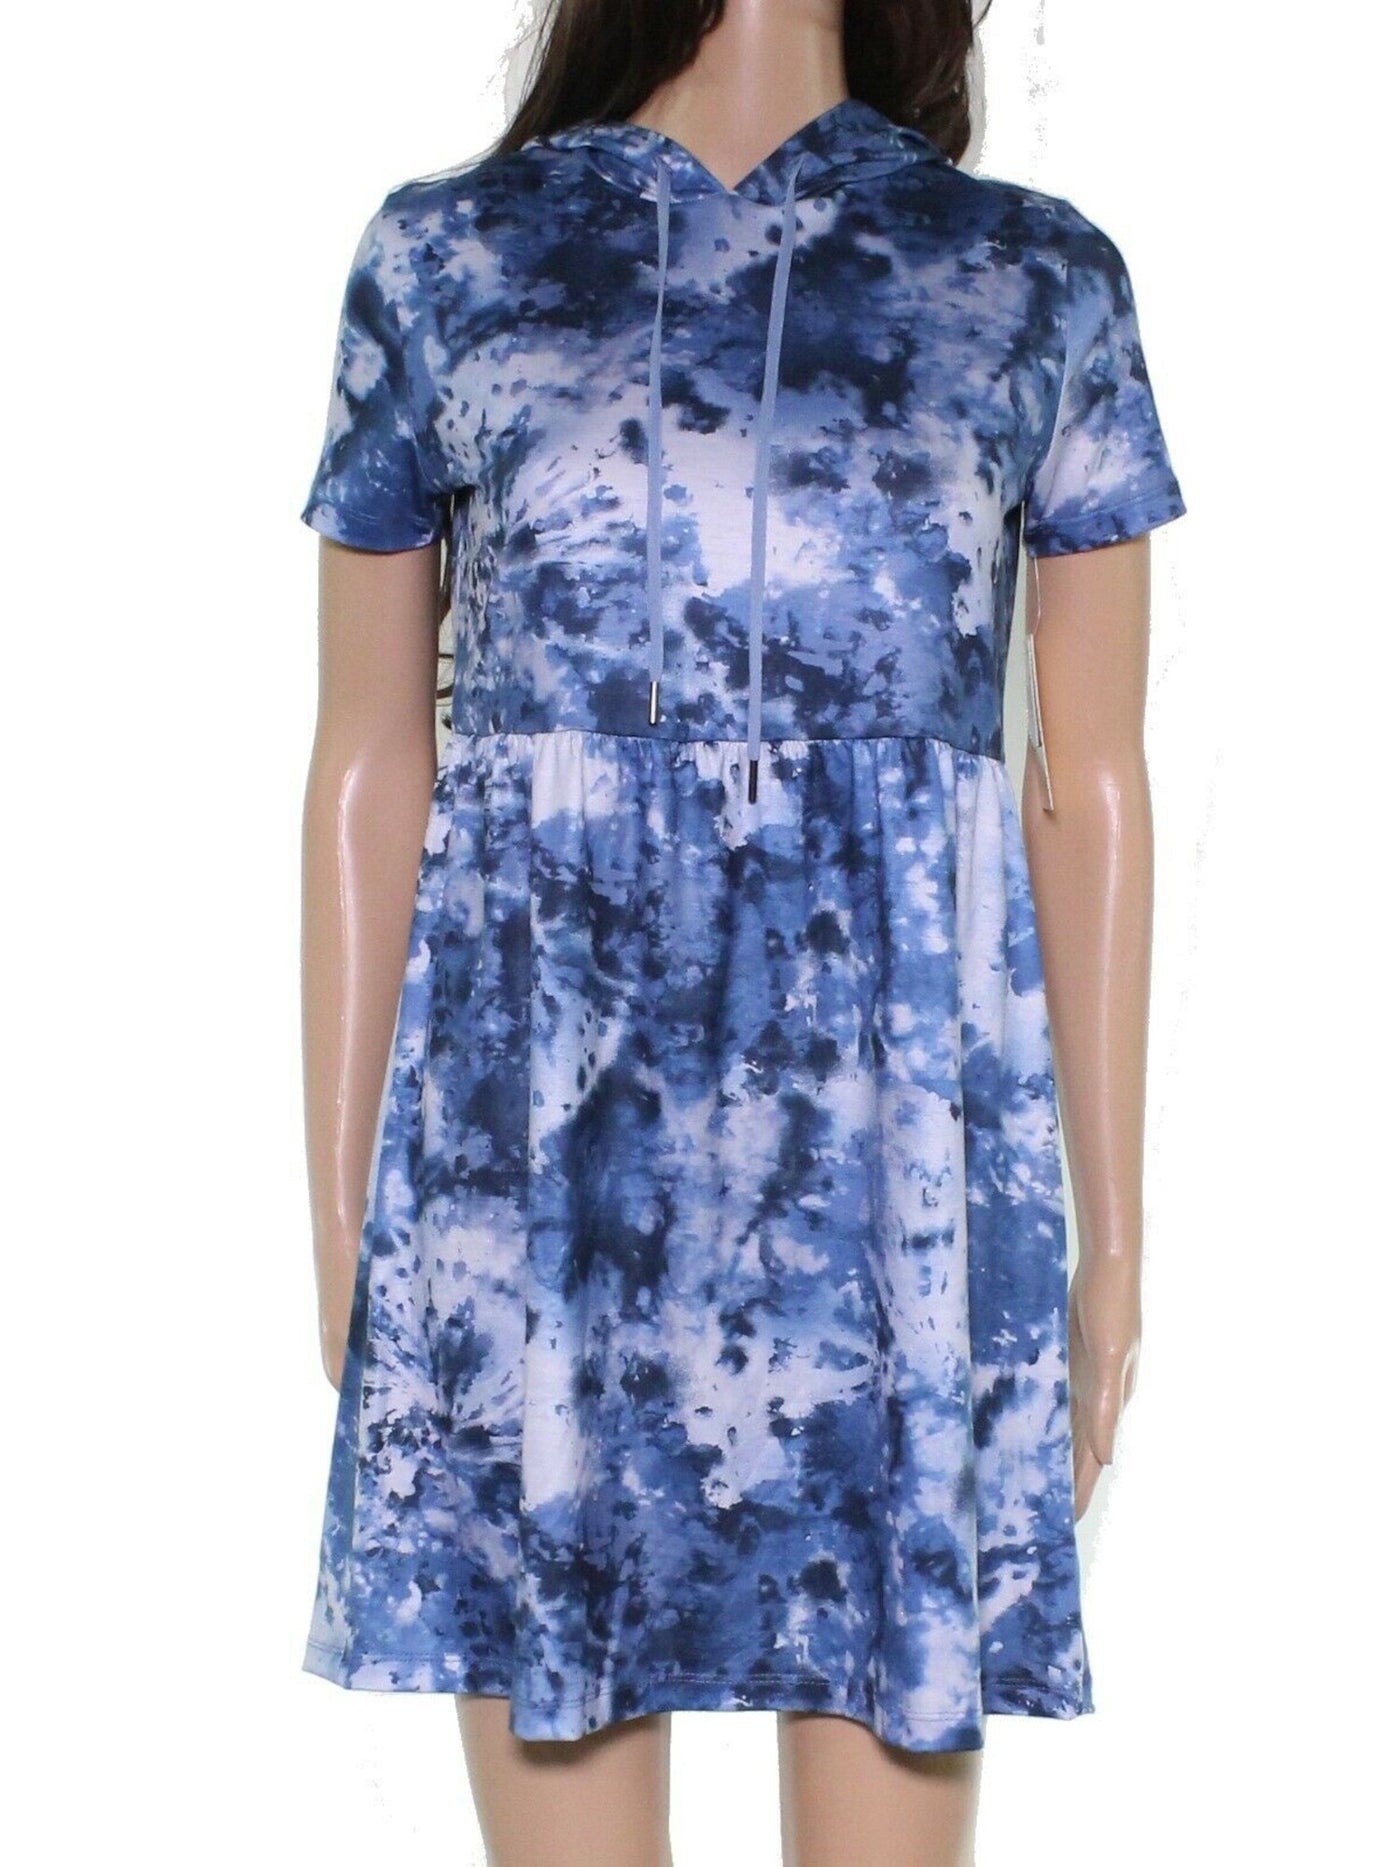 BEBOP Womens Blue Stretch Hooded Tie Dye Short Sleeve Crew Neck Above The Knee Fit + Flare Dress Juniors XXS